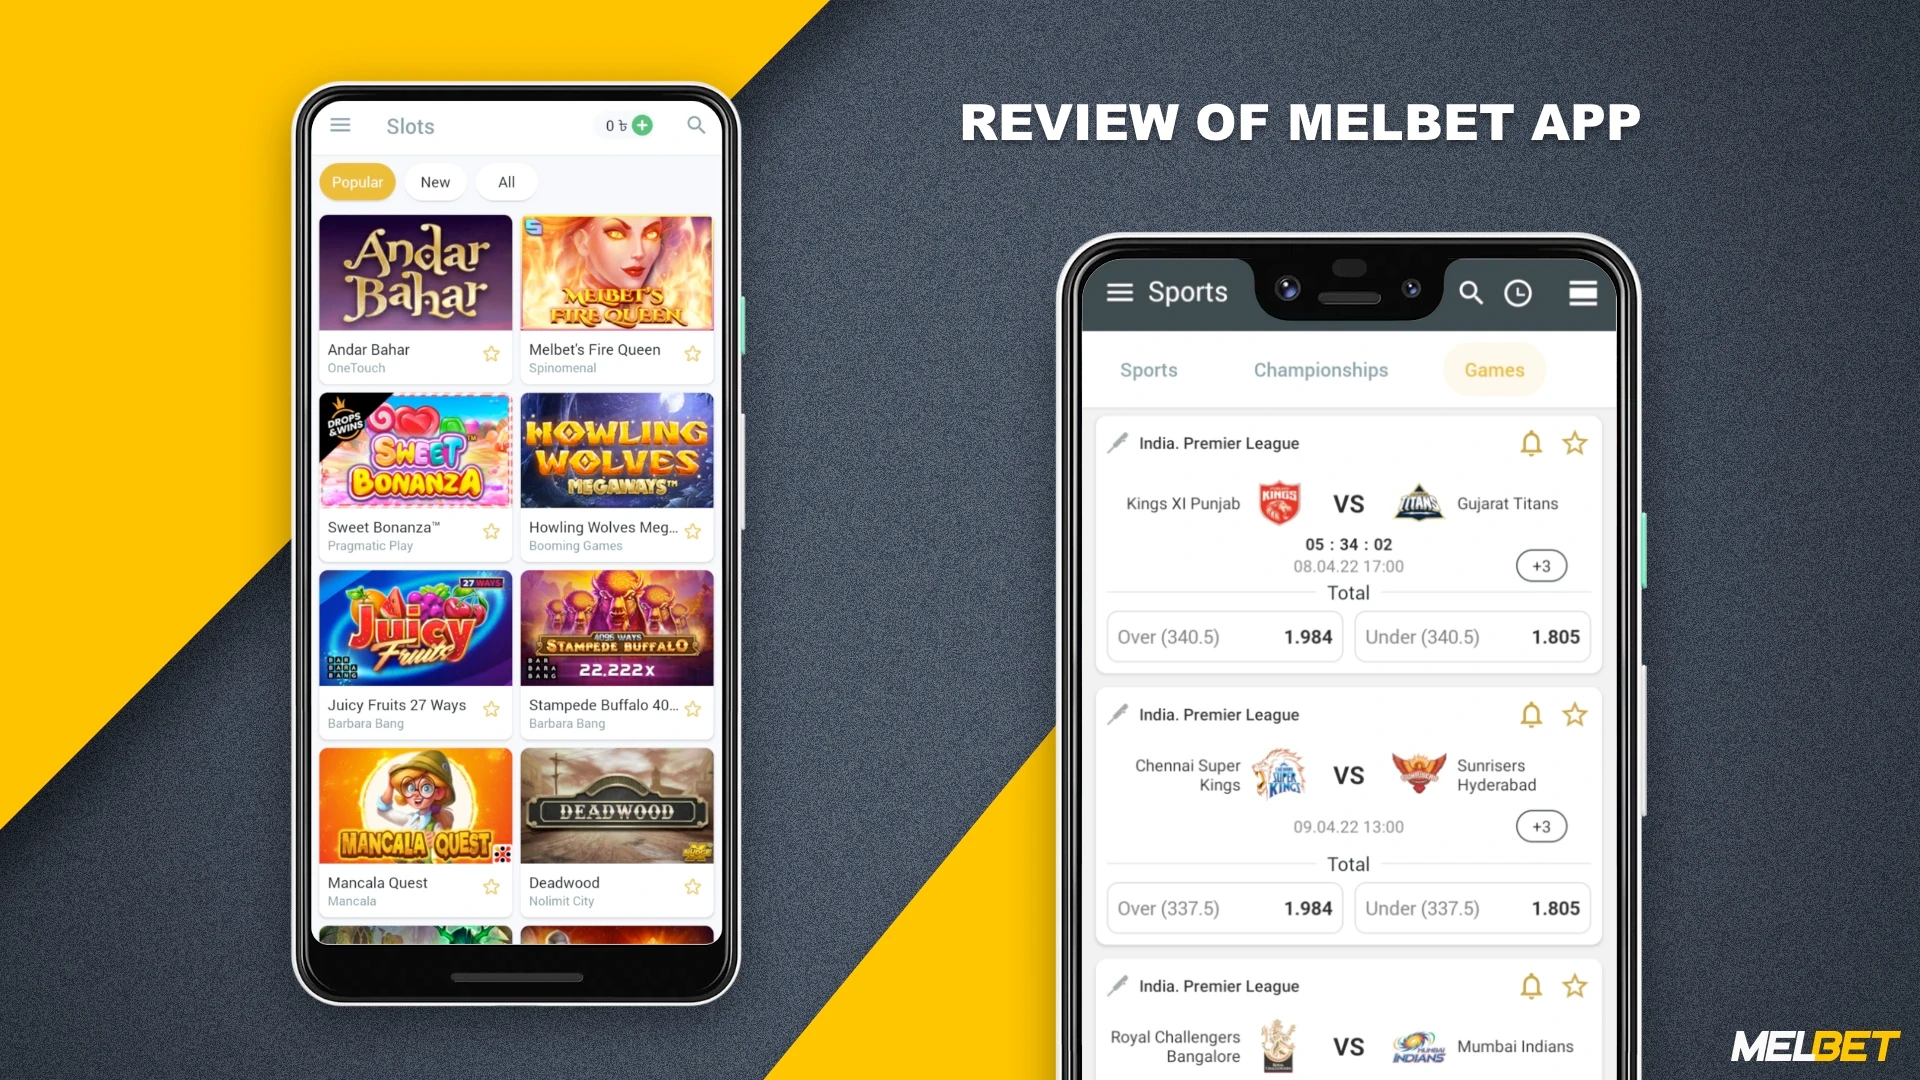 Review of the Melbet mobile app for casino and sports betting